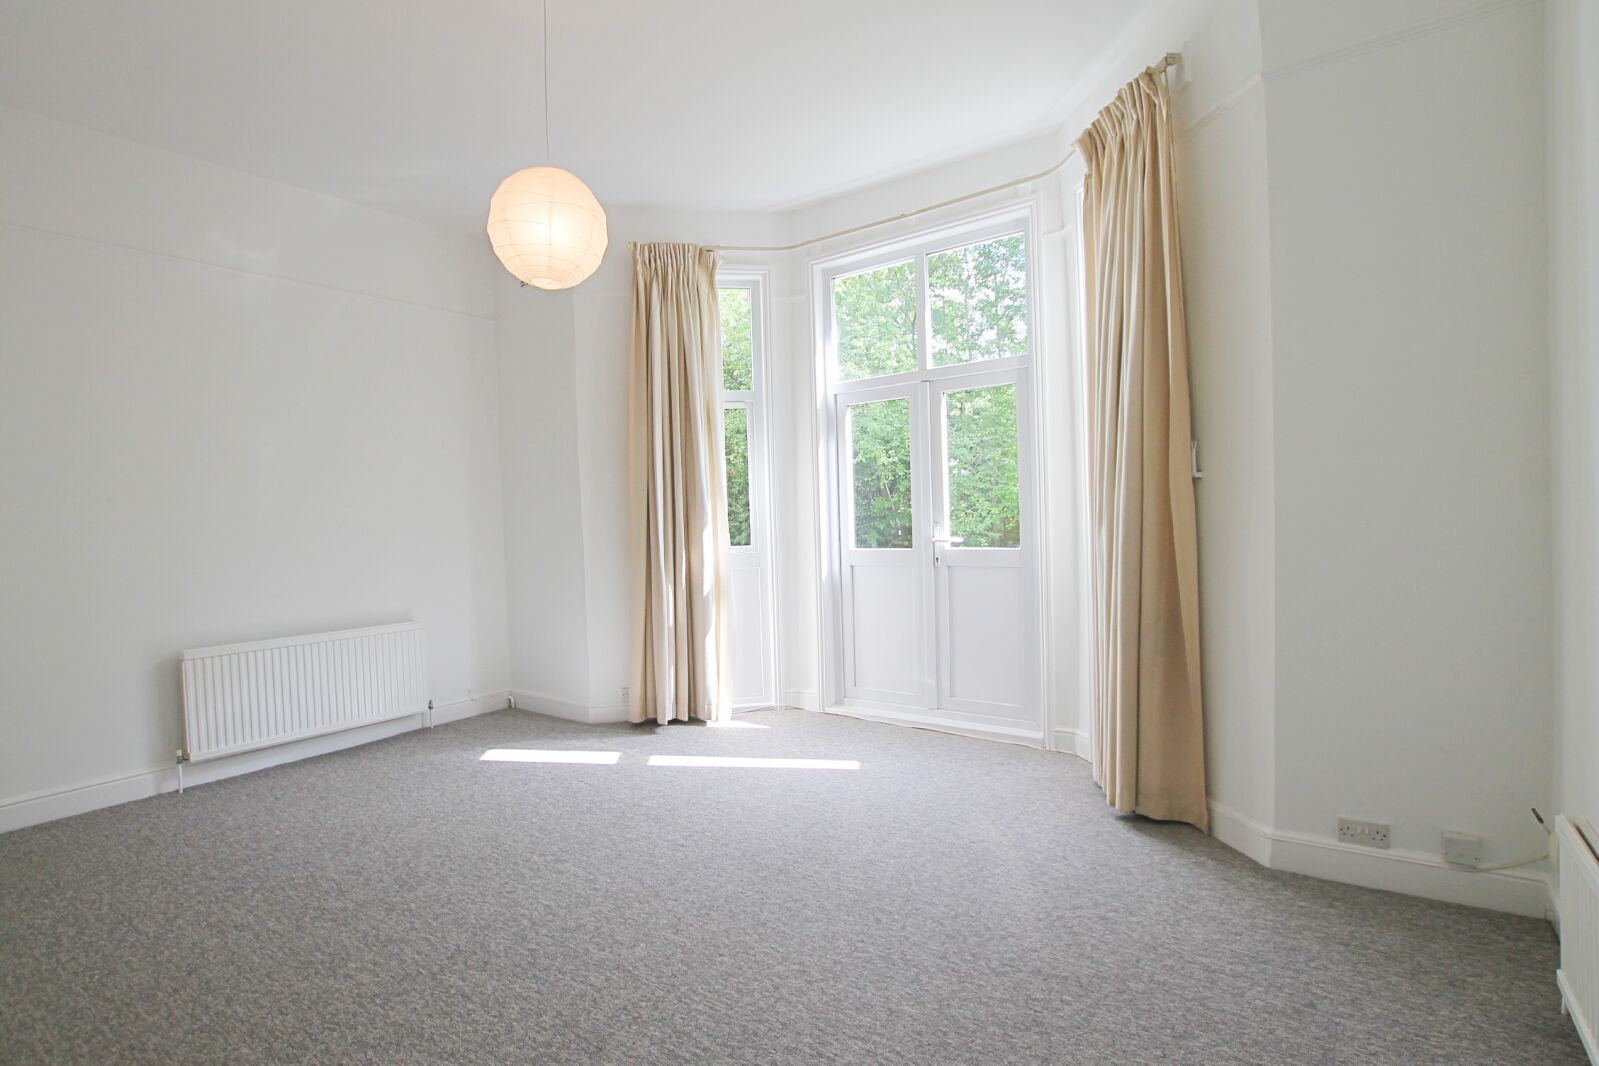 1 bedroom  flat to rent, Available now Grand Drive, London, SW20, main image